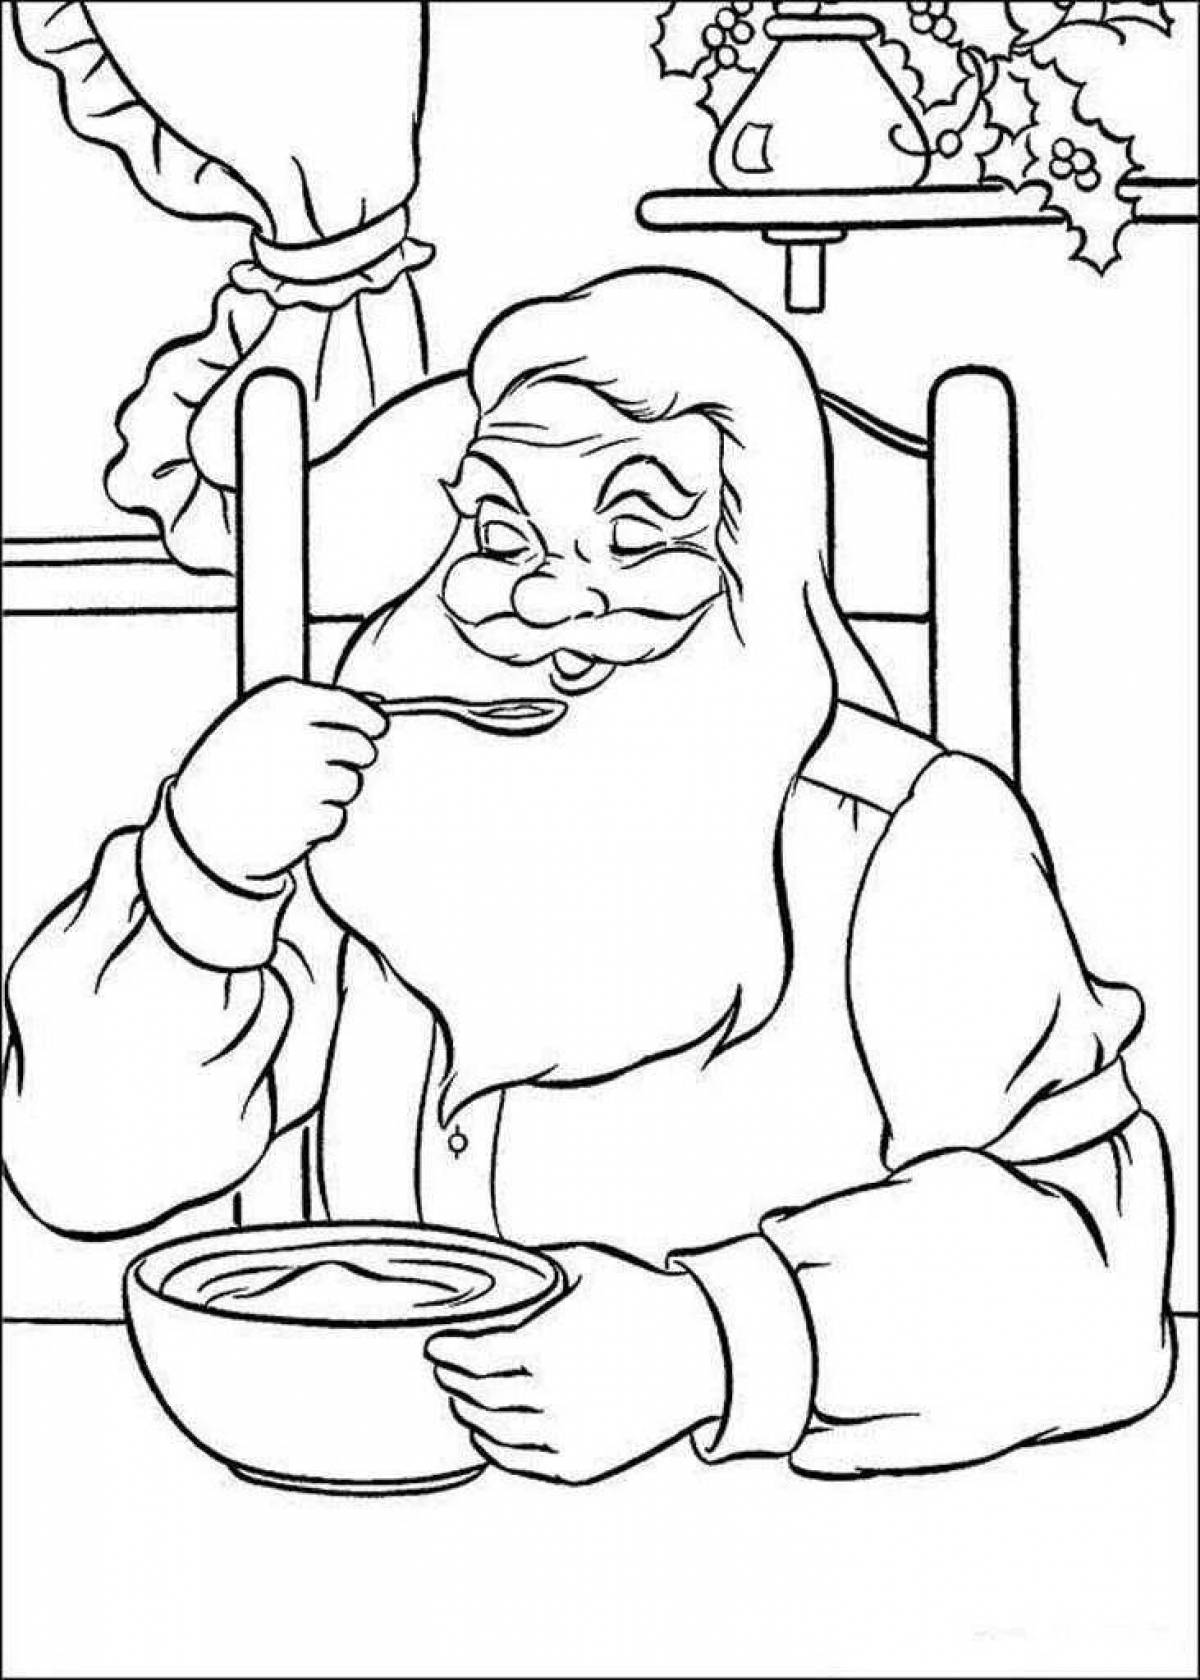 Grand coloring page odoevsky frost ivanovich